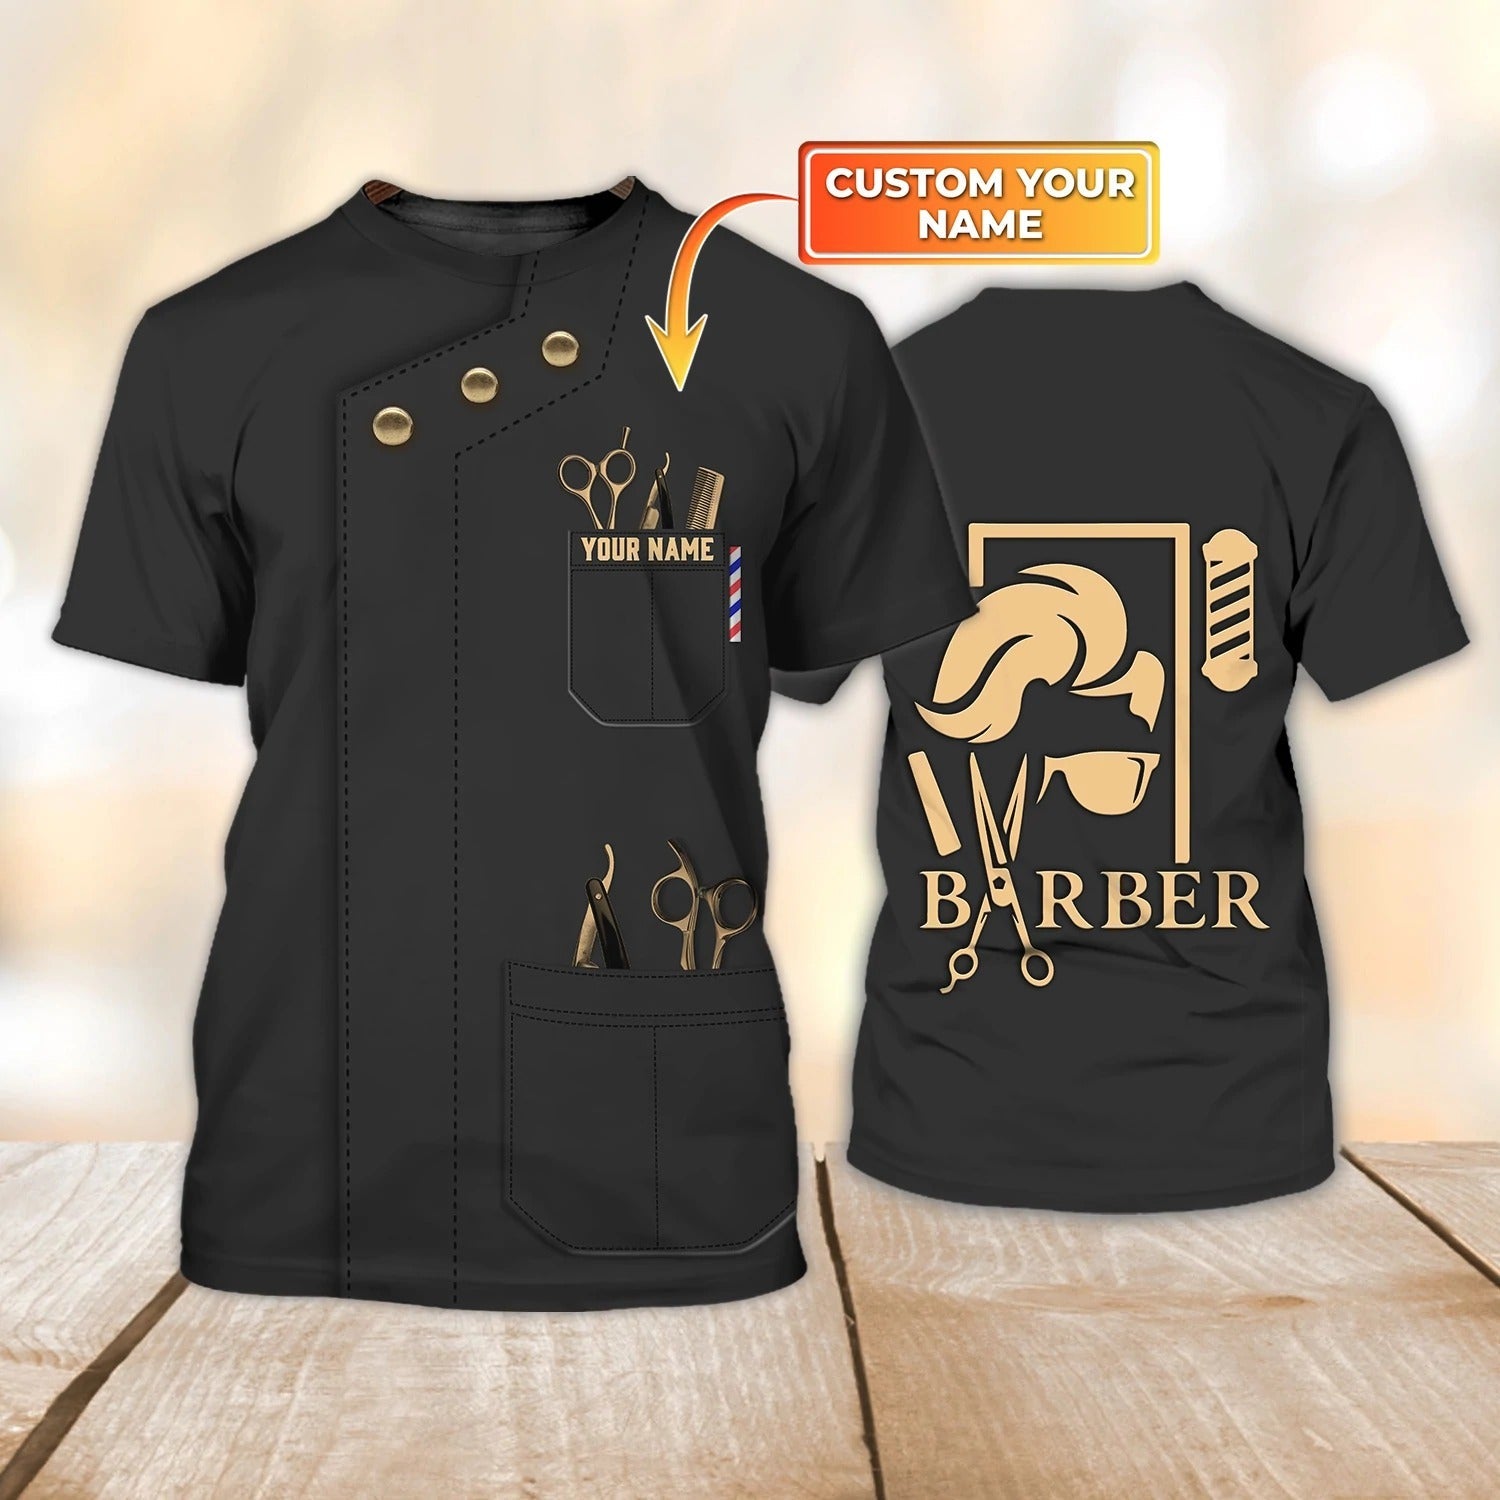 Personalized 3D All Over Print Barber Tee Shirt/ Barber Shirts/ Cool Shirt For Barber/ Present For A Barber